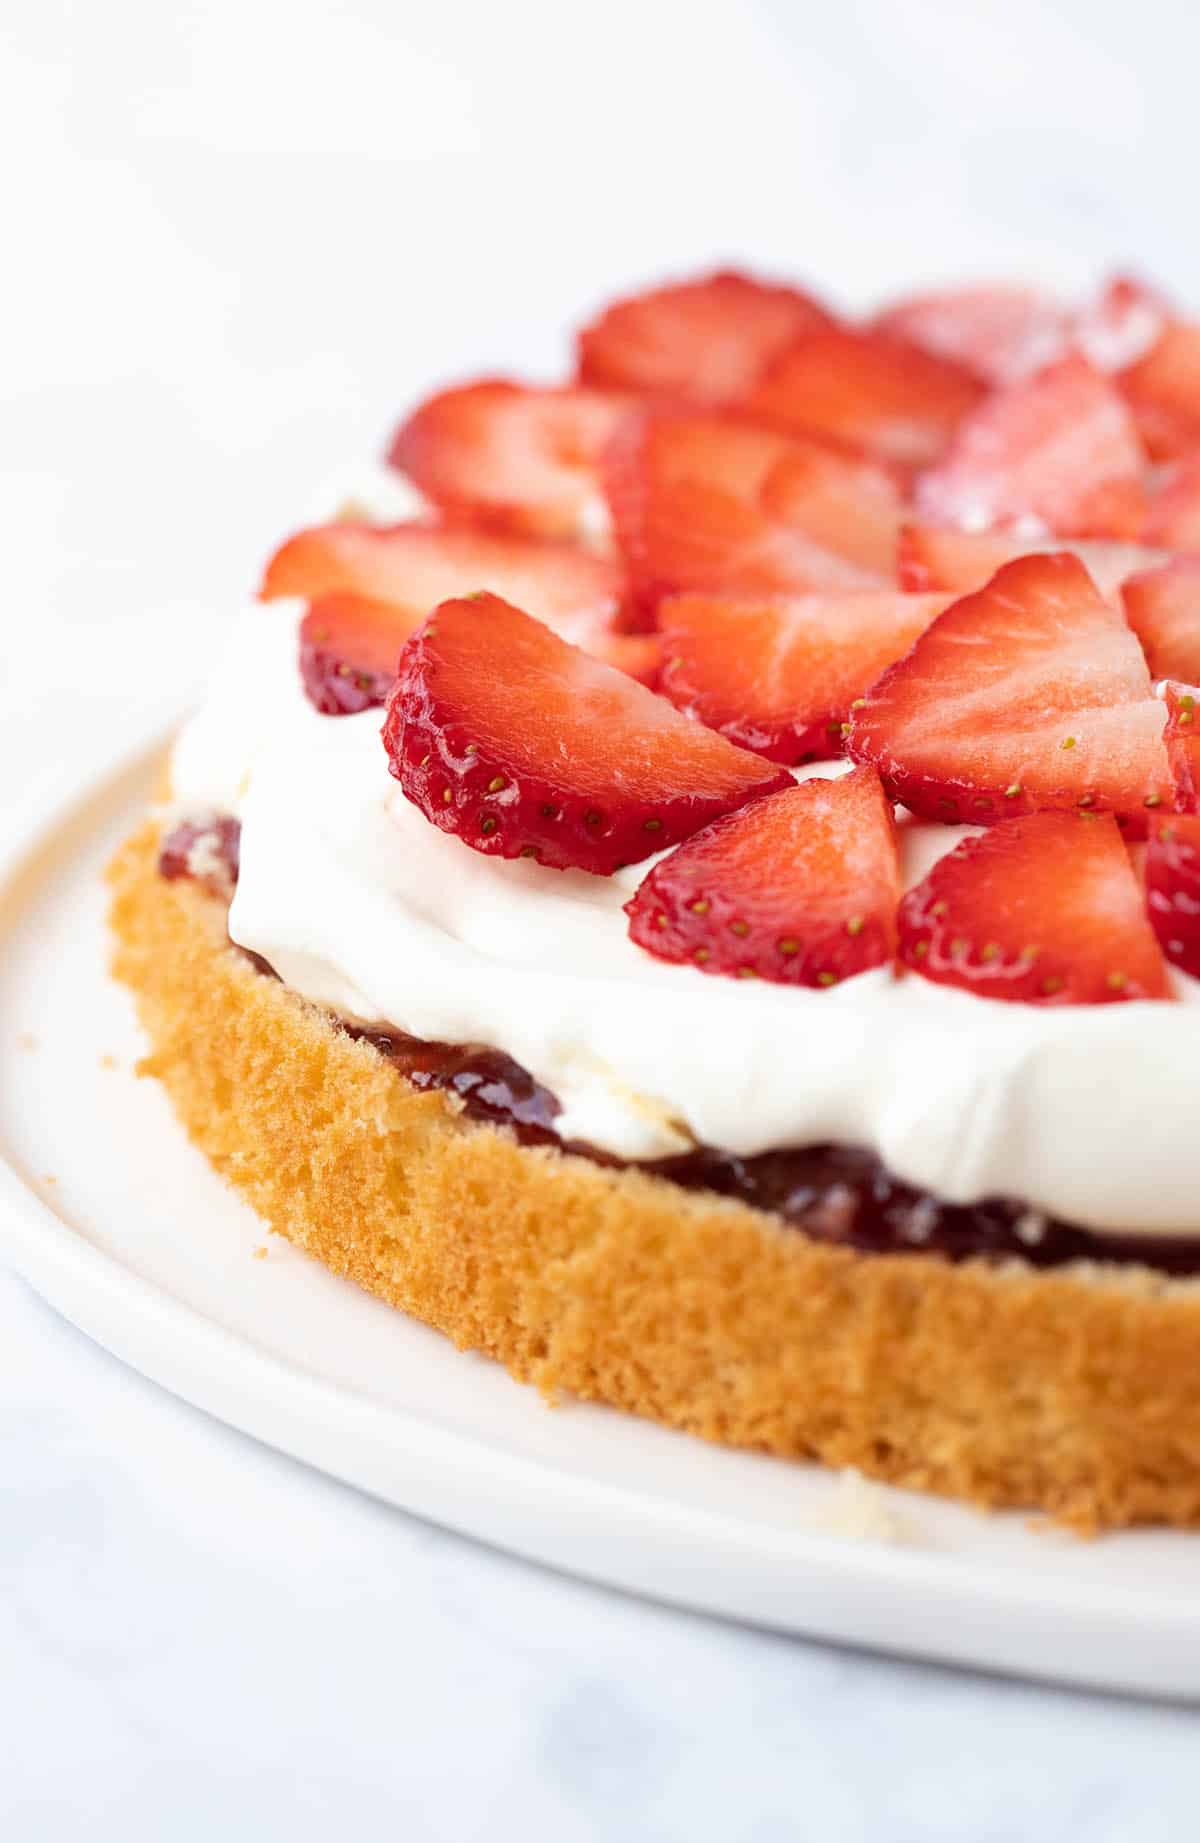 A sponge cake topped with jam, cream and strawberries on a white plate.